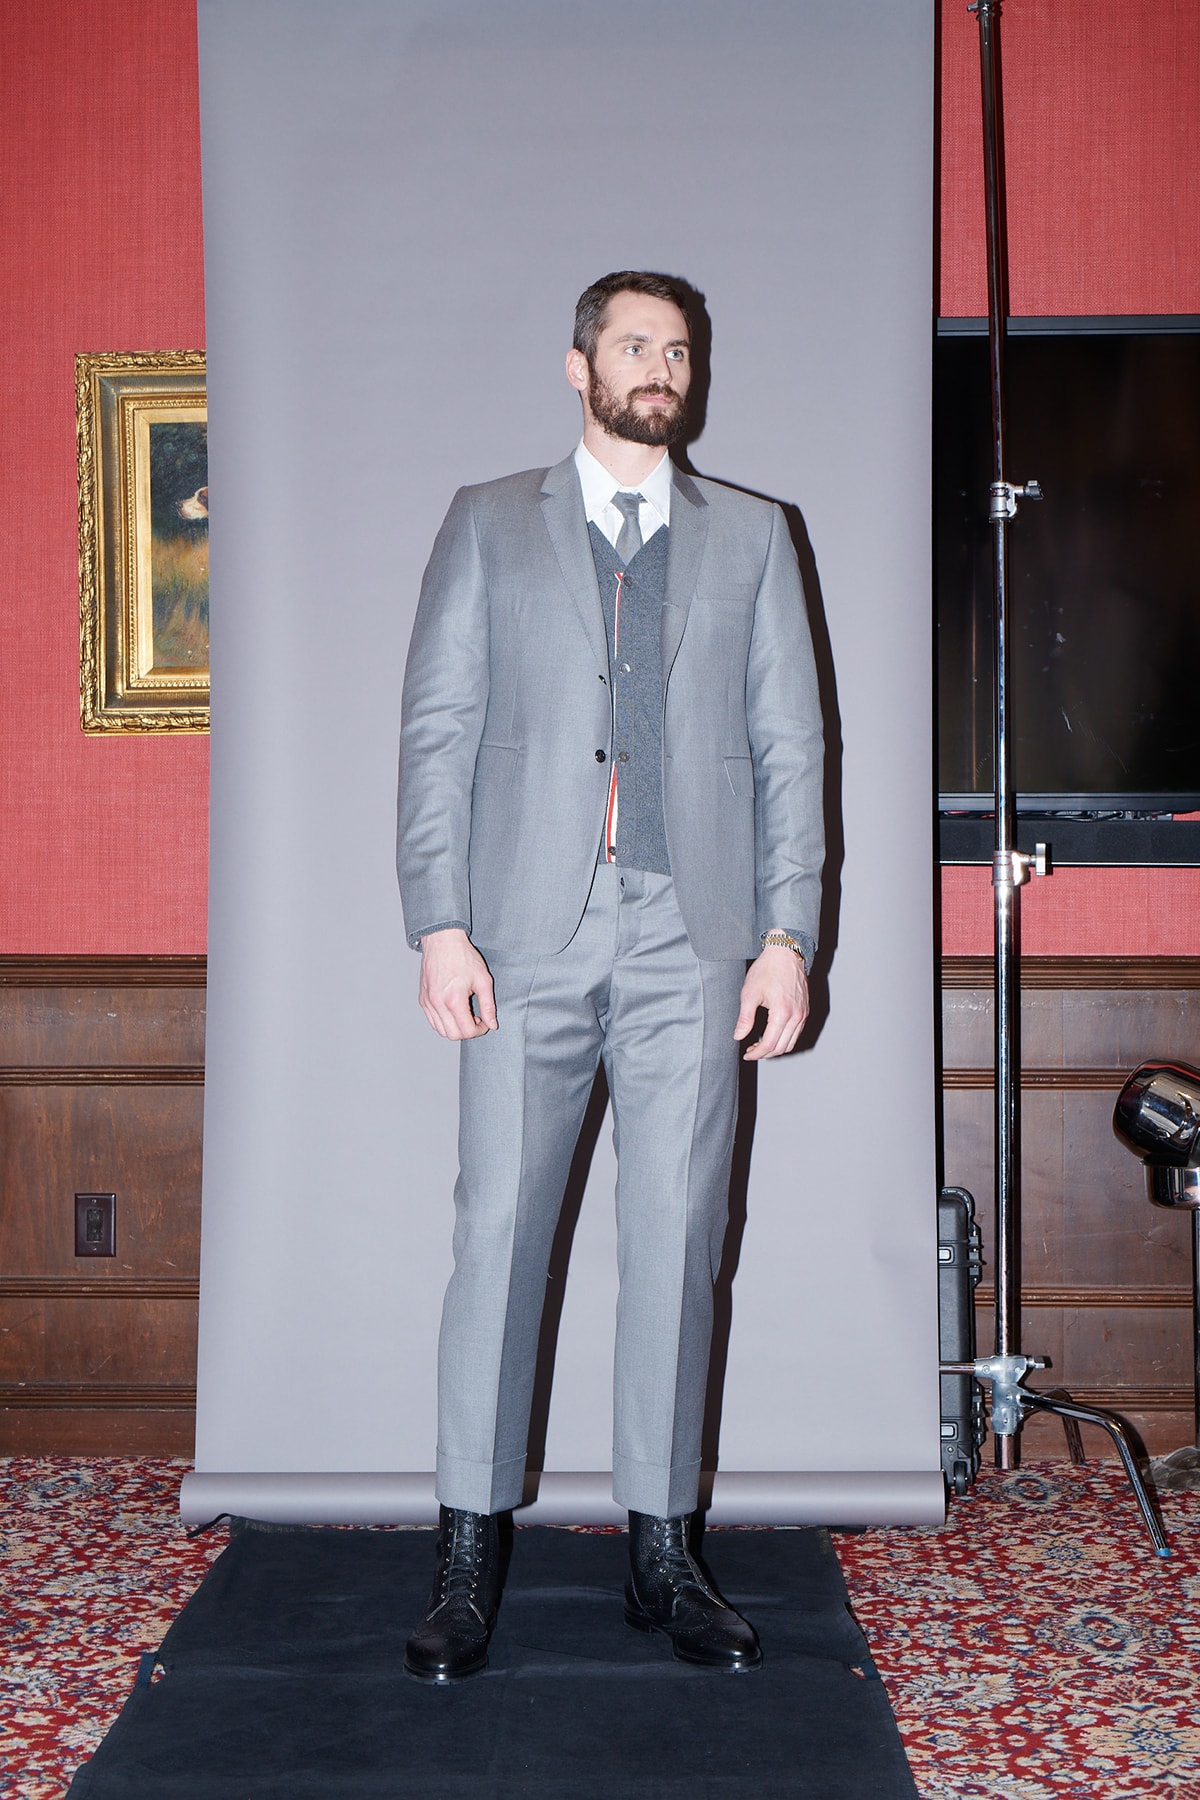 Cleveland Cavaliers x Thom Browne Suit Project | Hypebeast